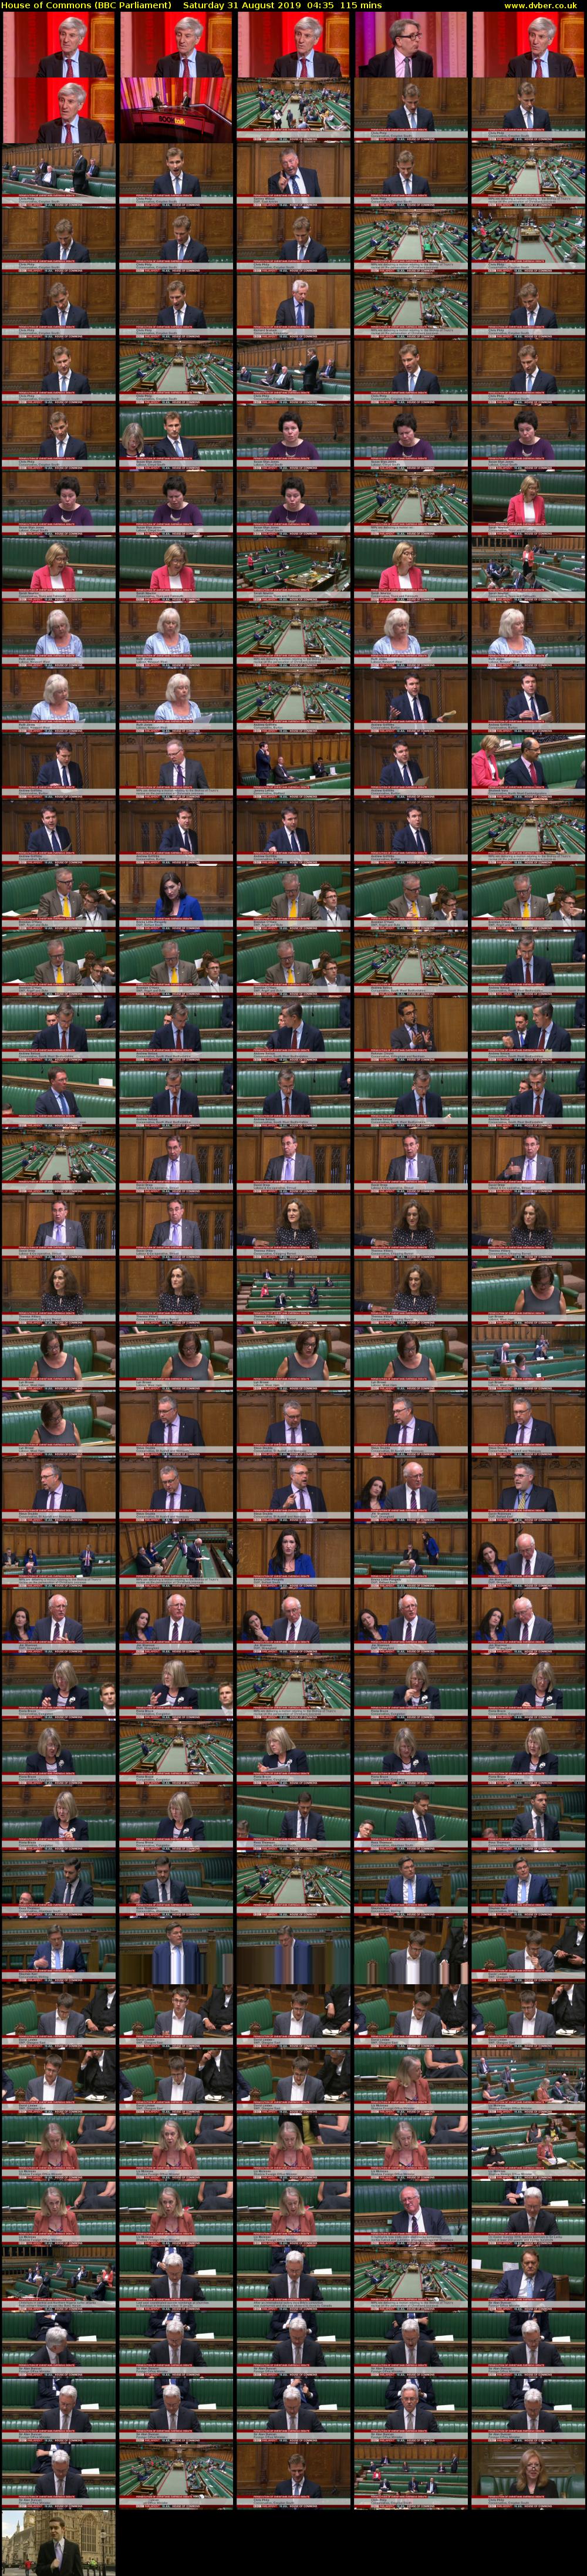 House of Commons (BBC Parliament) Saturday 31 August 2019 04:35 - 06:30